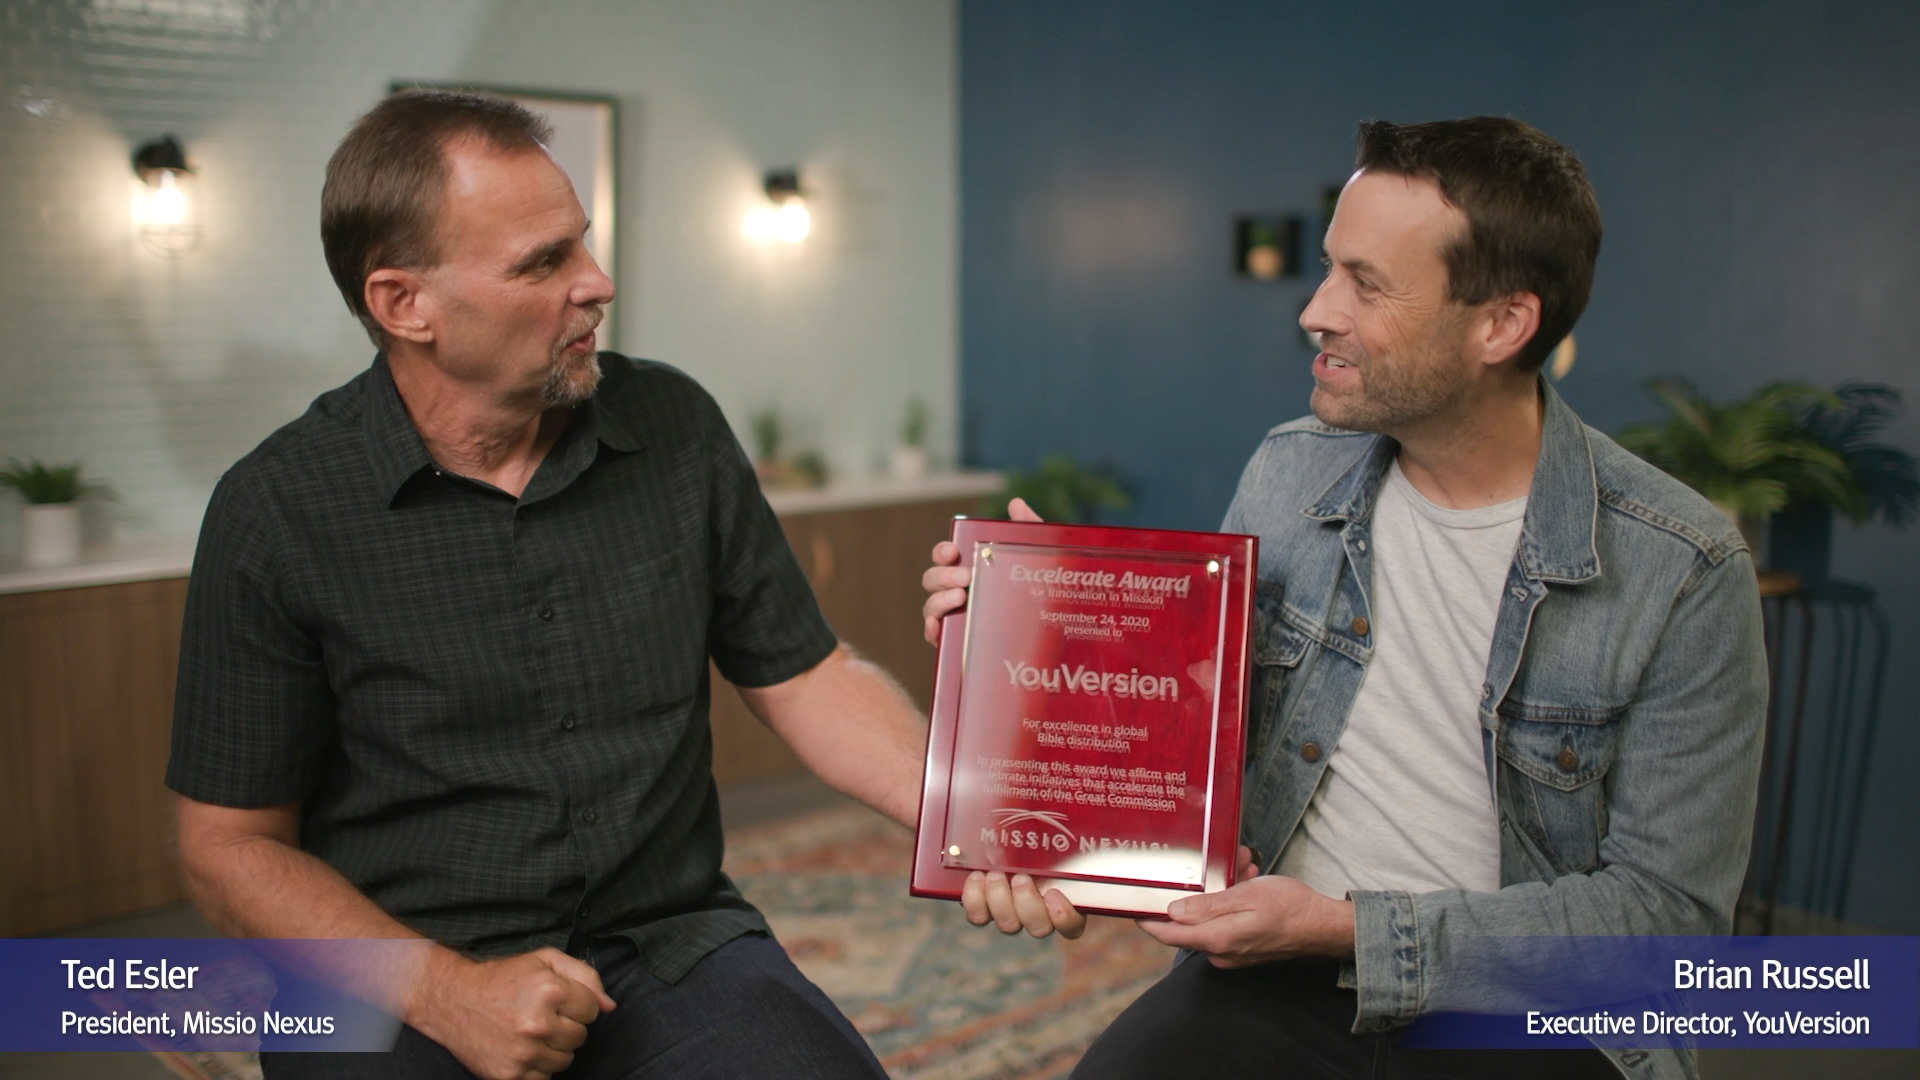 Excelerate Award Presented to YouVersion